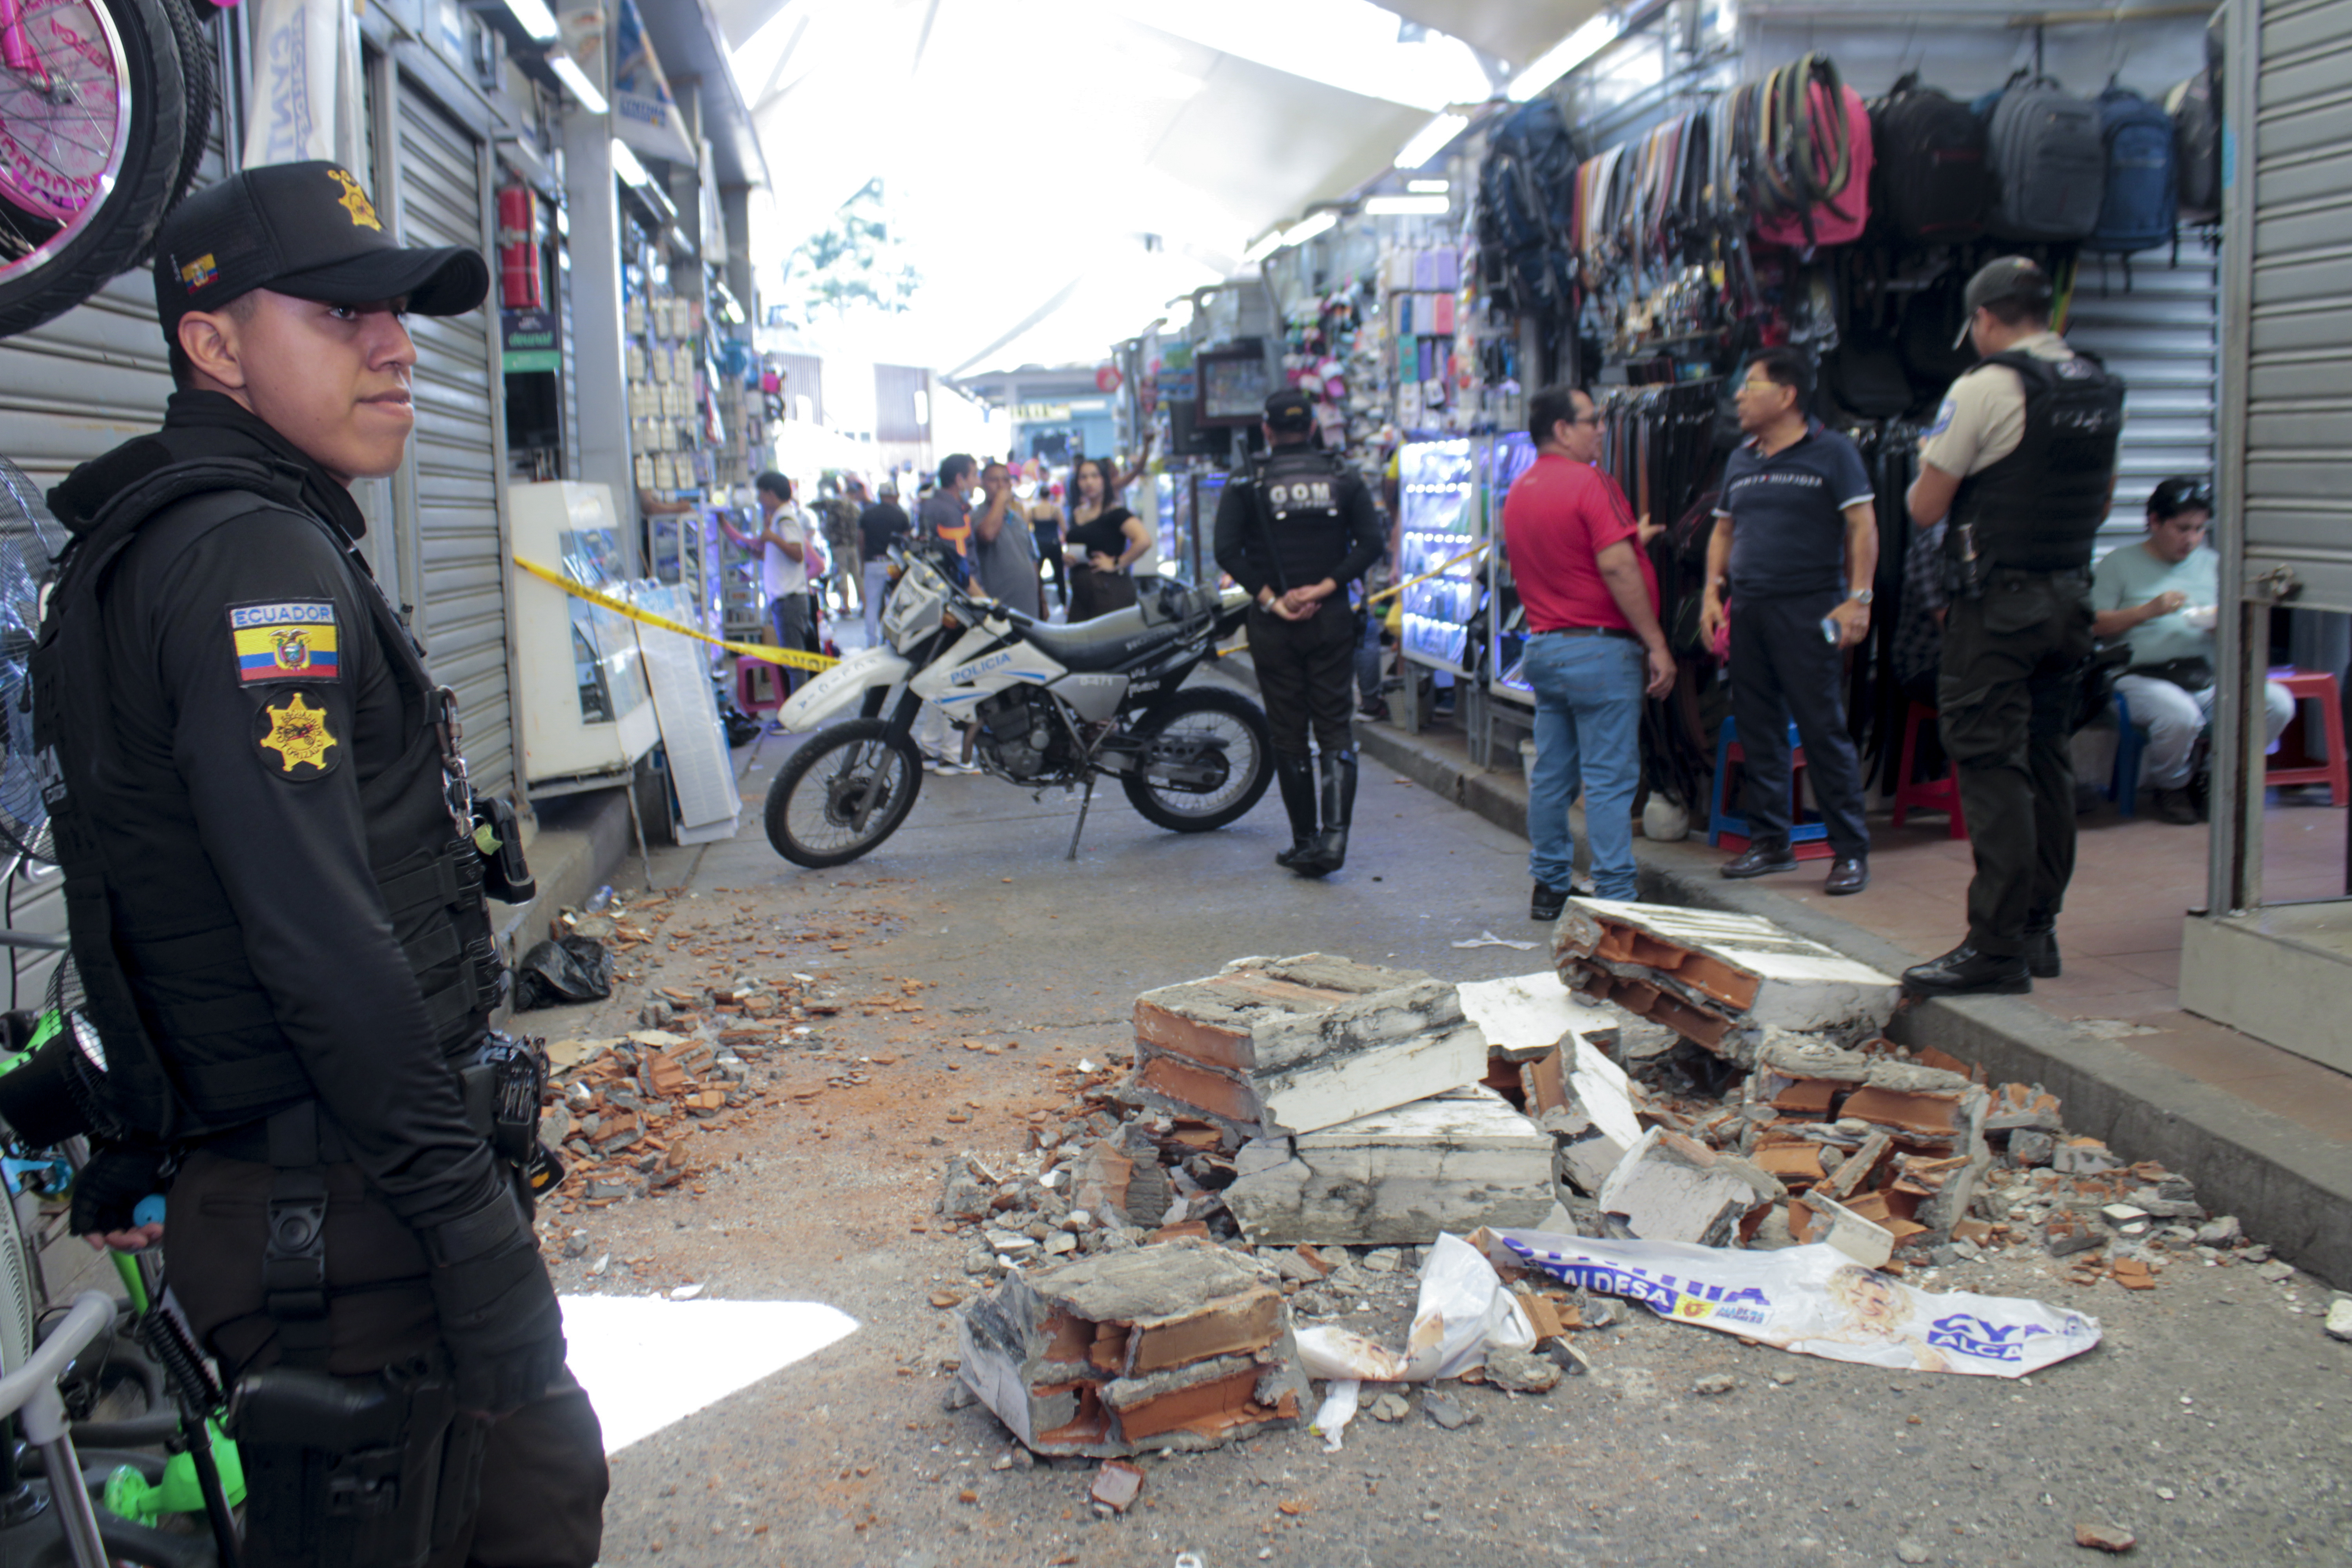 Police officers guard a street with fallen debris from a building in a commercial area after a strong earthquake, in Machala, Ecuador, Saturday, March 18, 2023. The US Geological Survey said the 6.7 quake struck at 50 miles (80 kilometers) south of Guayaquil.  (AP Photo/Stalin Diaz)